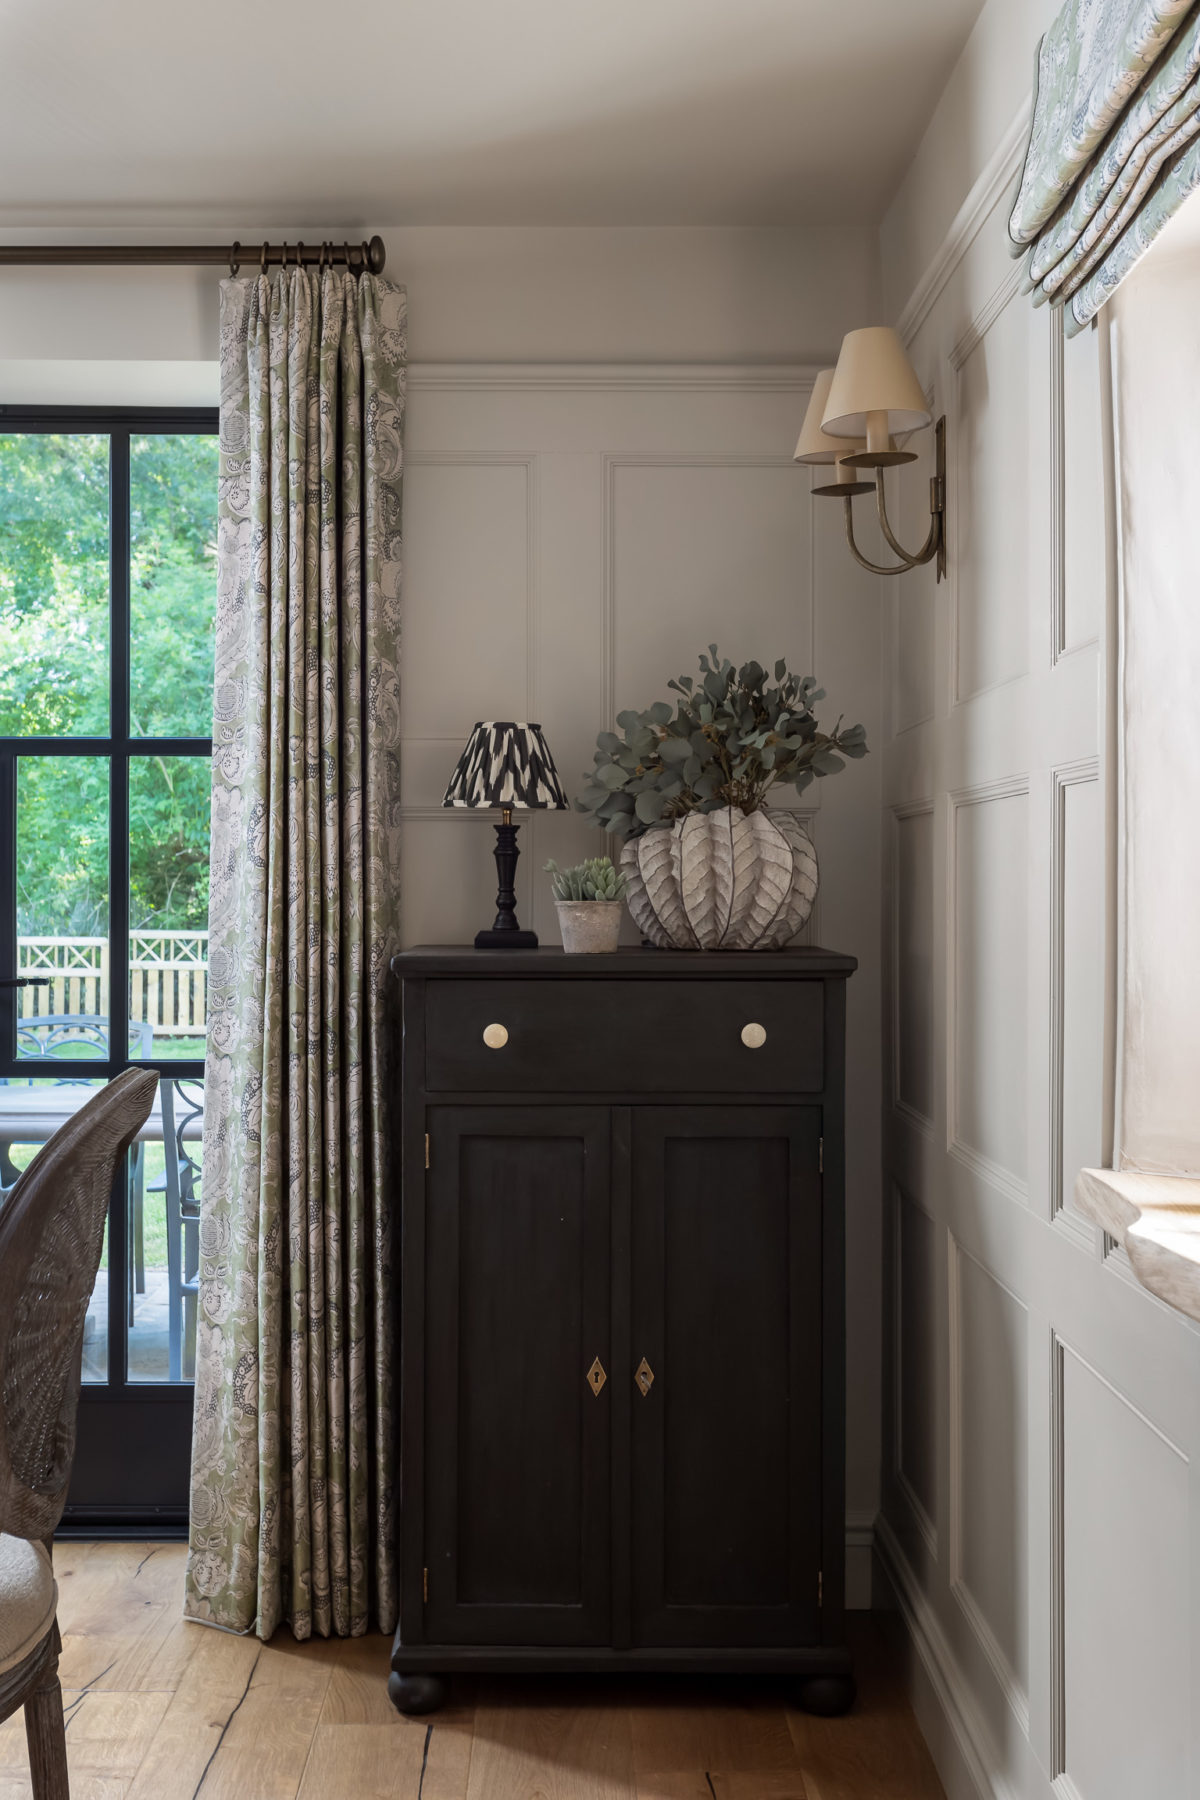 Wood panelled walls, wall lights, painted black sideboard, Crittal French doors & curtains